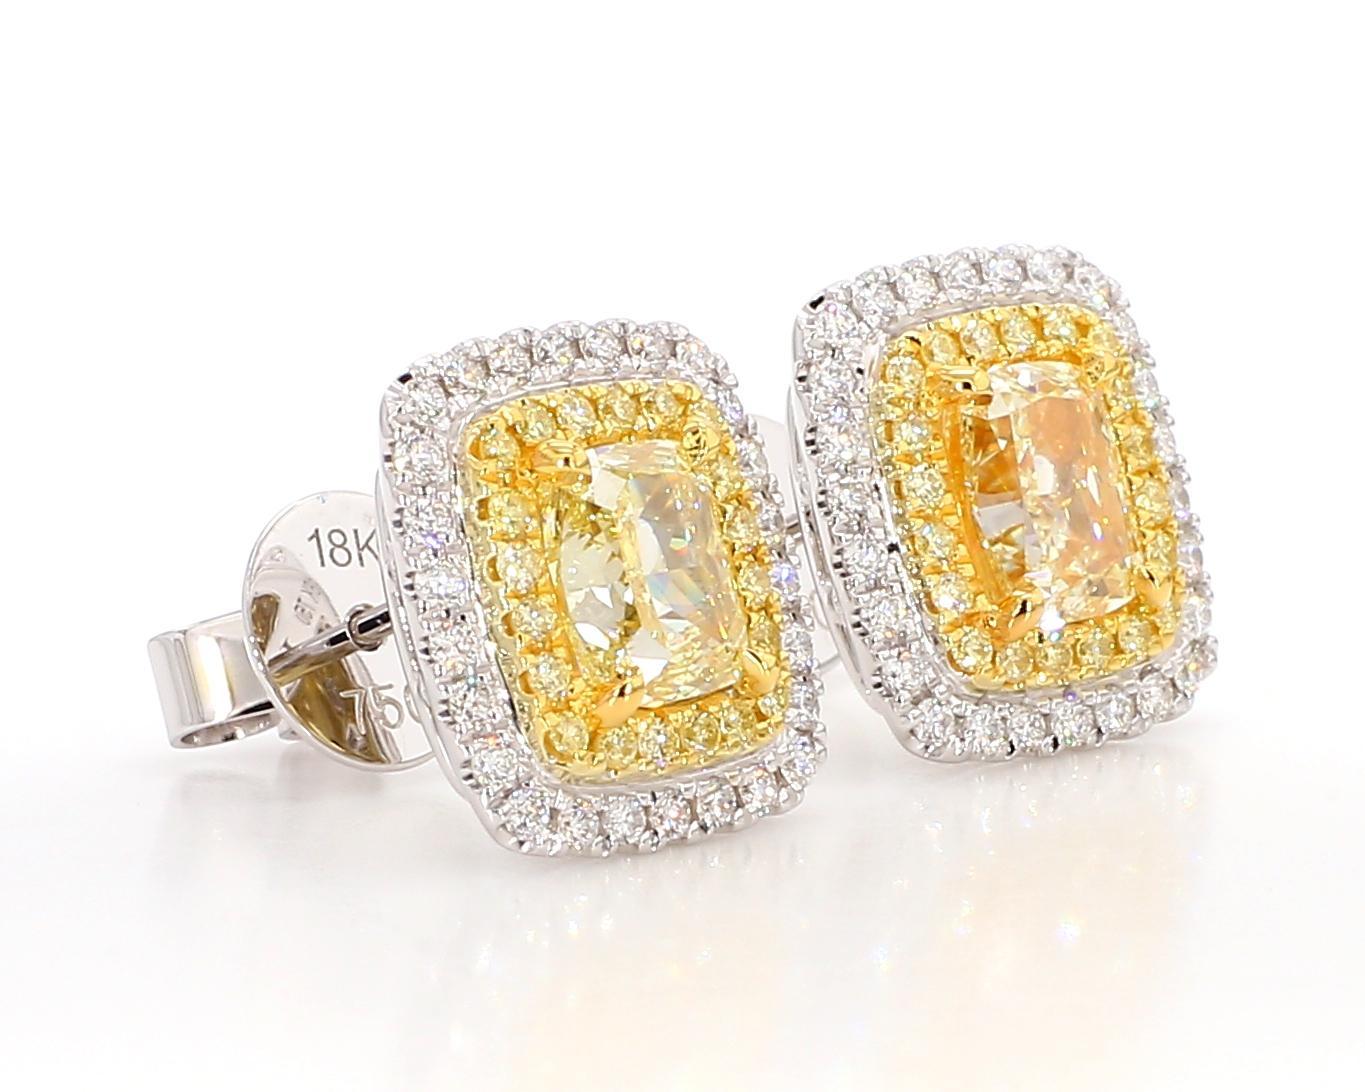 GIA Certified Natural Yellow Cushion Diamond 3.02 Carat TW Gold Stud Earrings For Sale 1